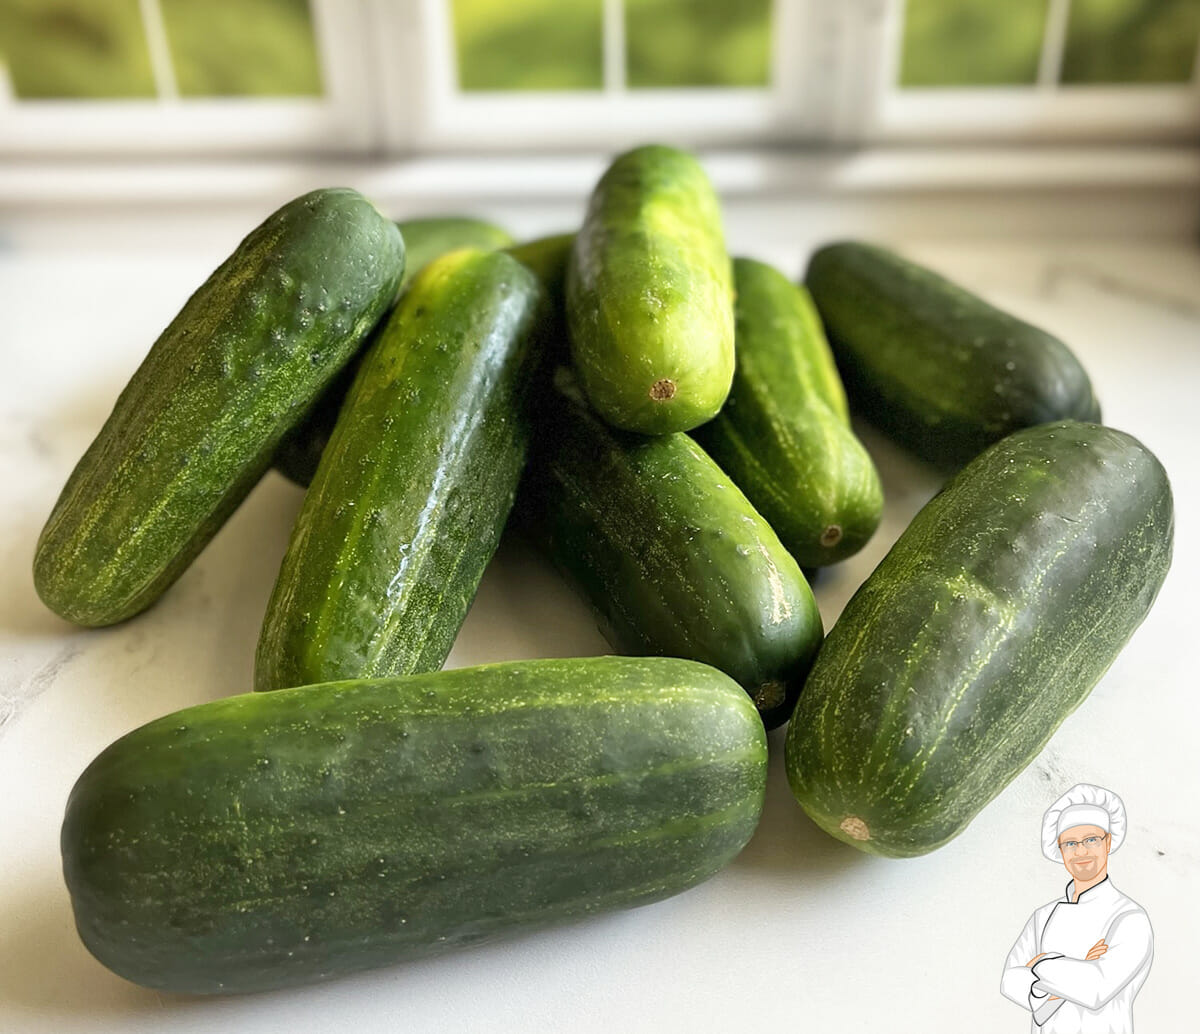 Fresh kirby cucumbers from the garden to be pickled